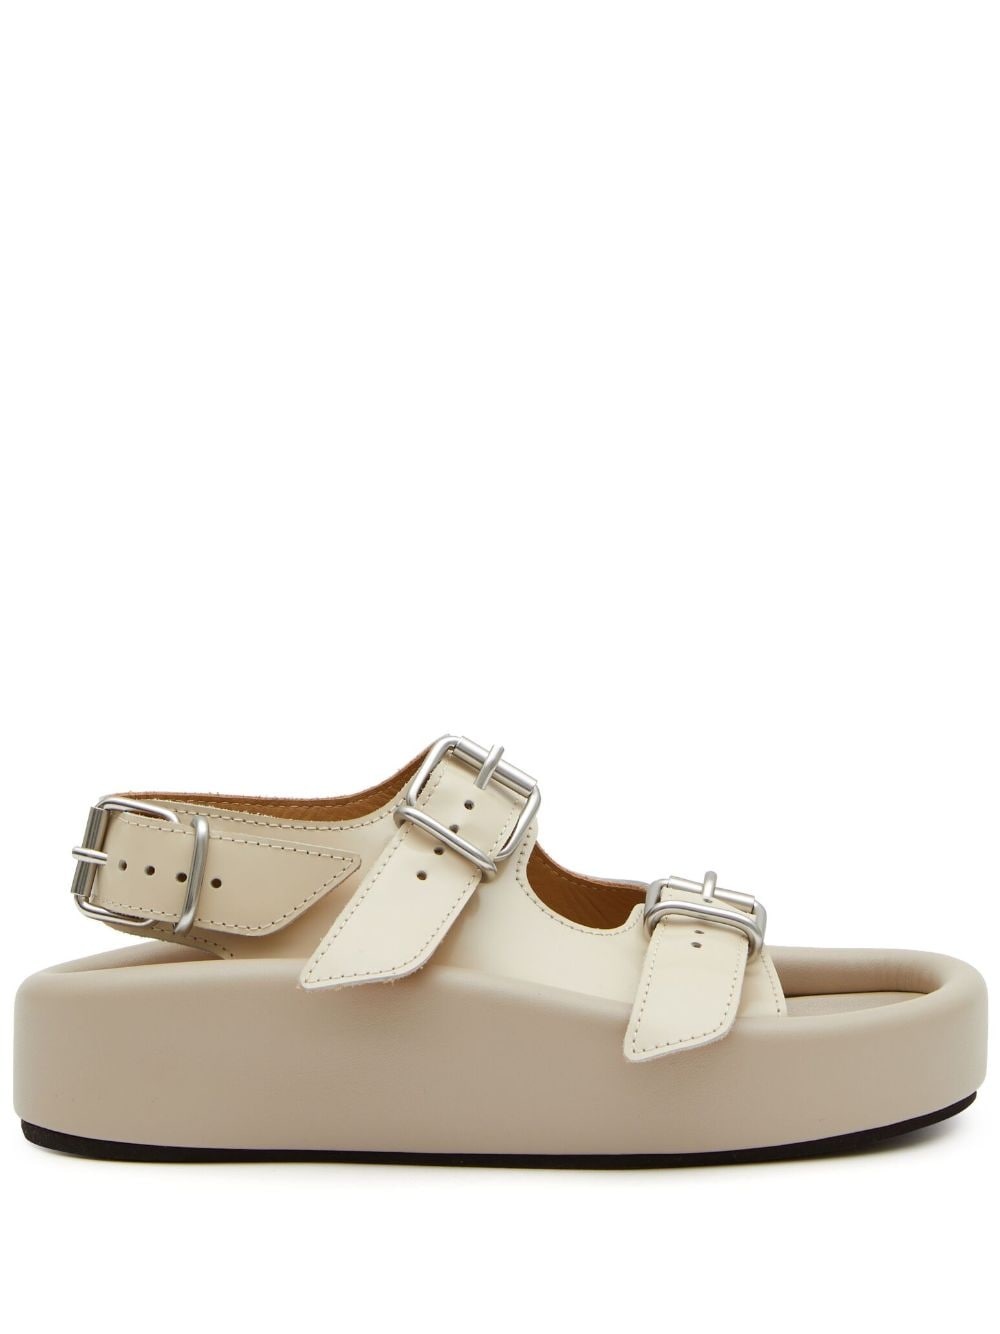 open-toe buckled sandals - 1